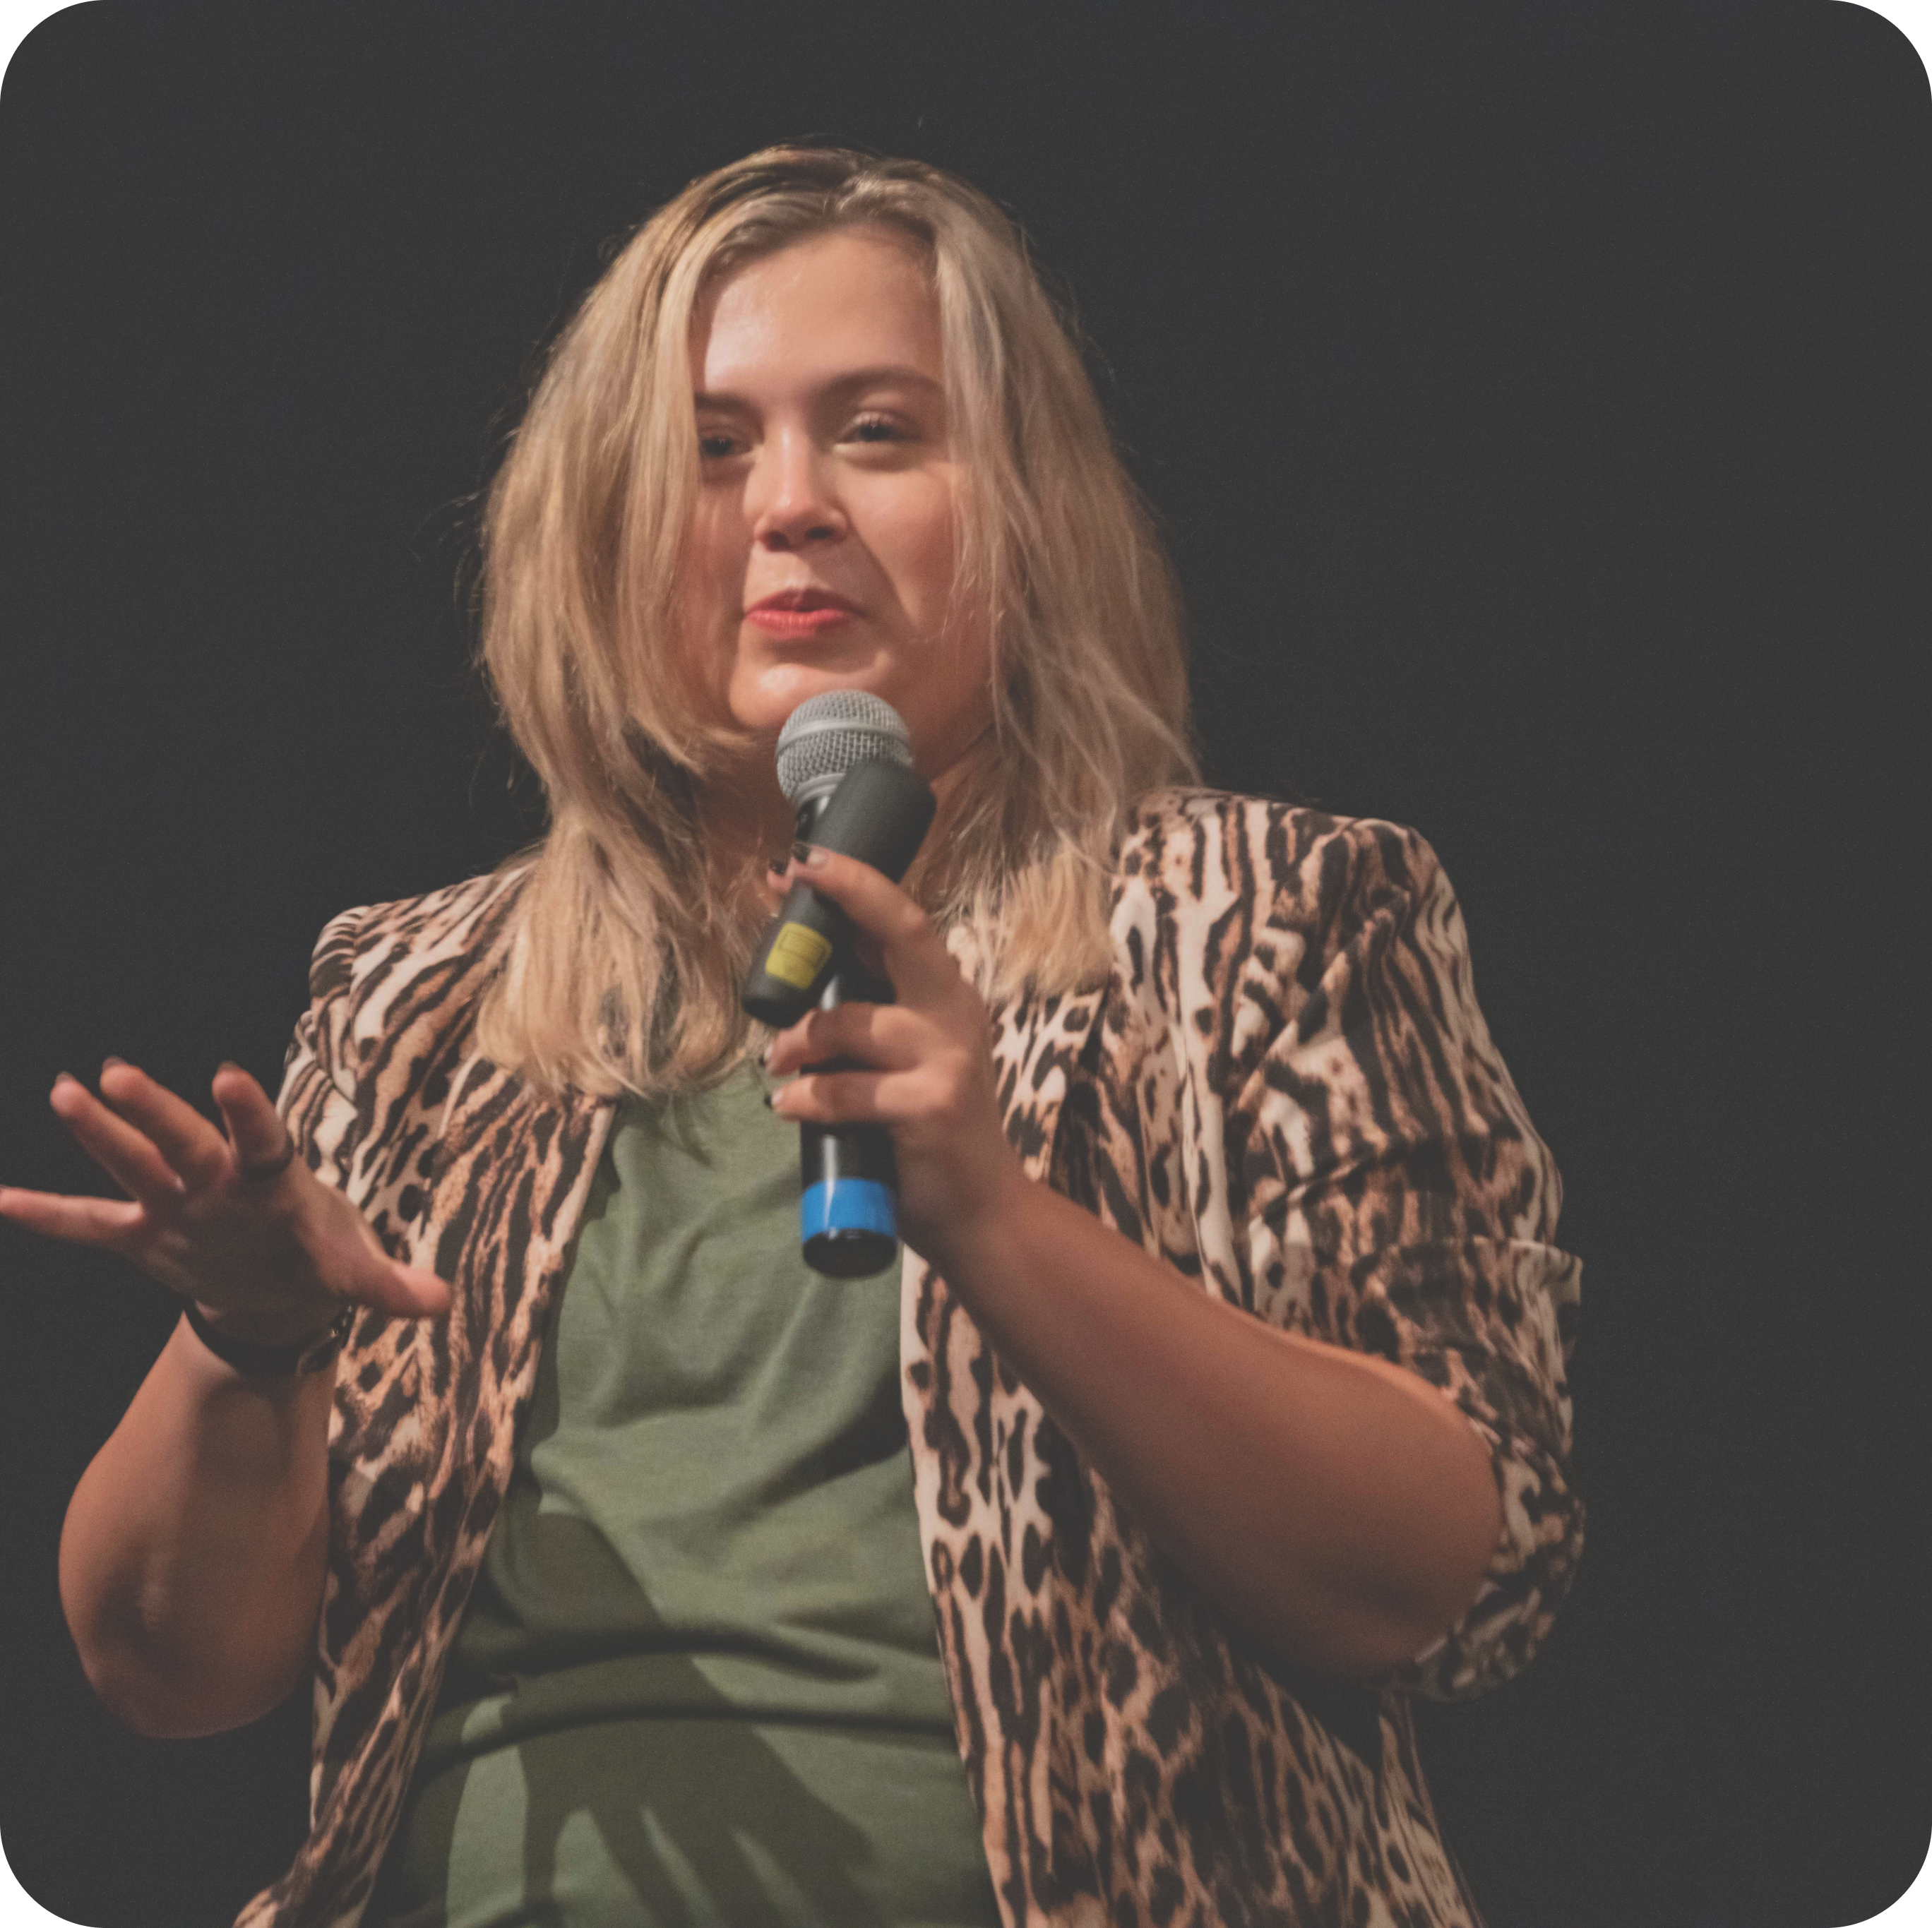 Rikki is a woman with medium length blond hair. She's wearing an olive green shirt, a leopard print blazer with the cuffs rolled up, and red lipstick. She's holding a microphone and is talking to the audience at a speaking event.